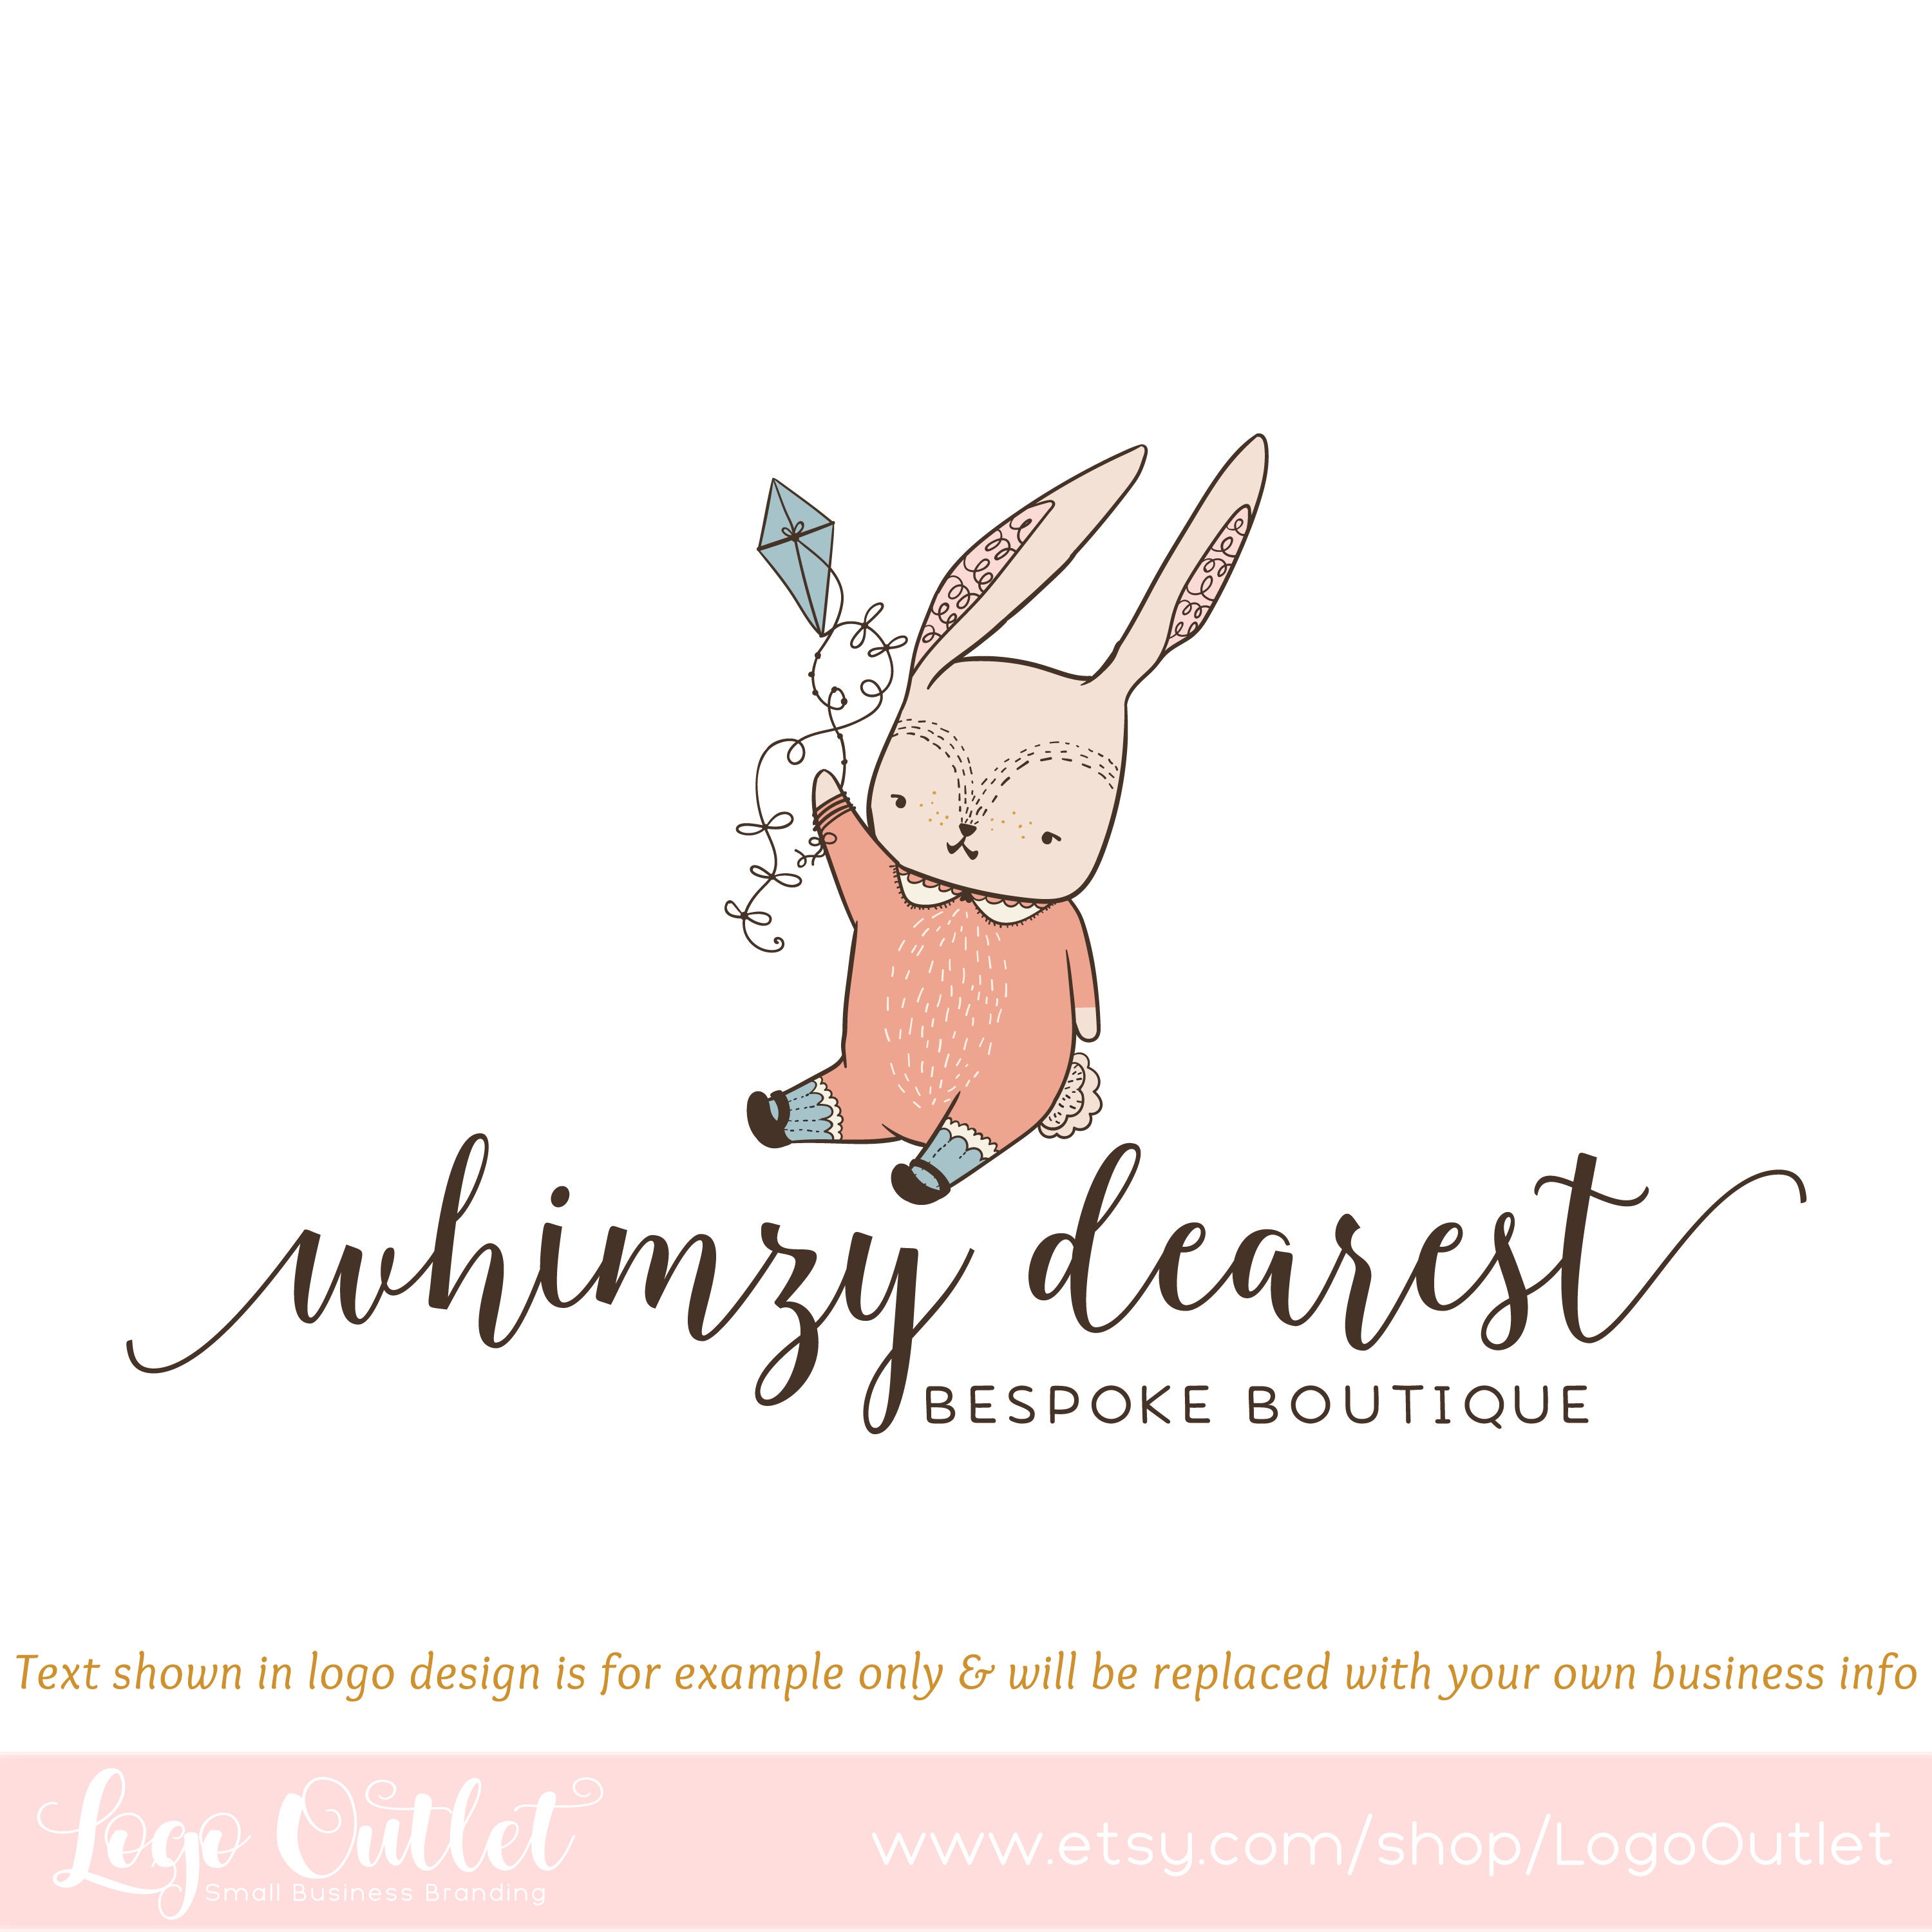 Bunny & Kite Premade Logo Design Includes Files for Web and - Etsy